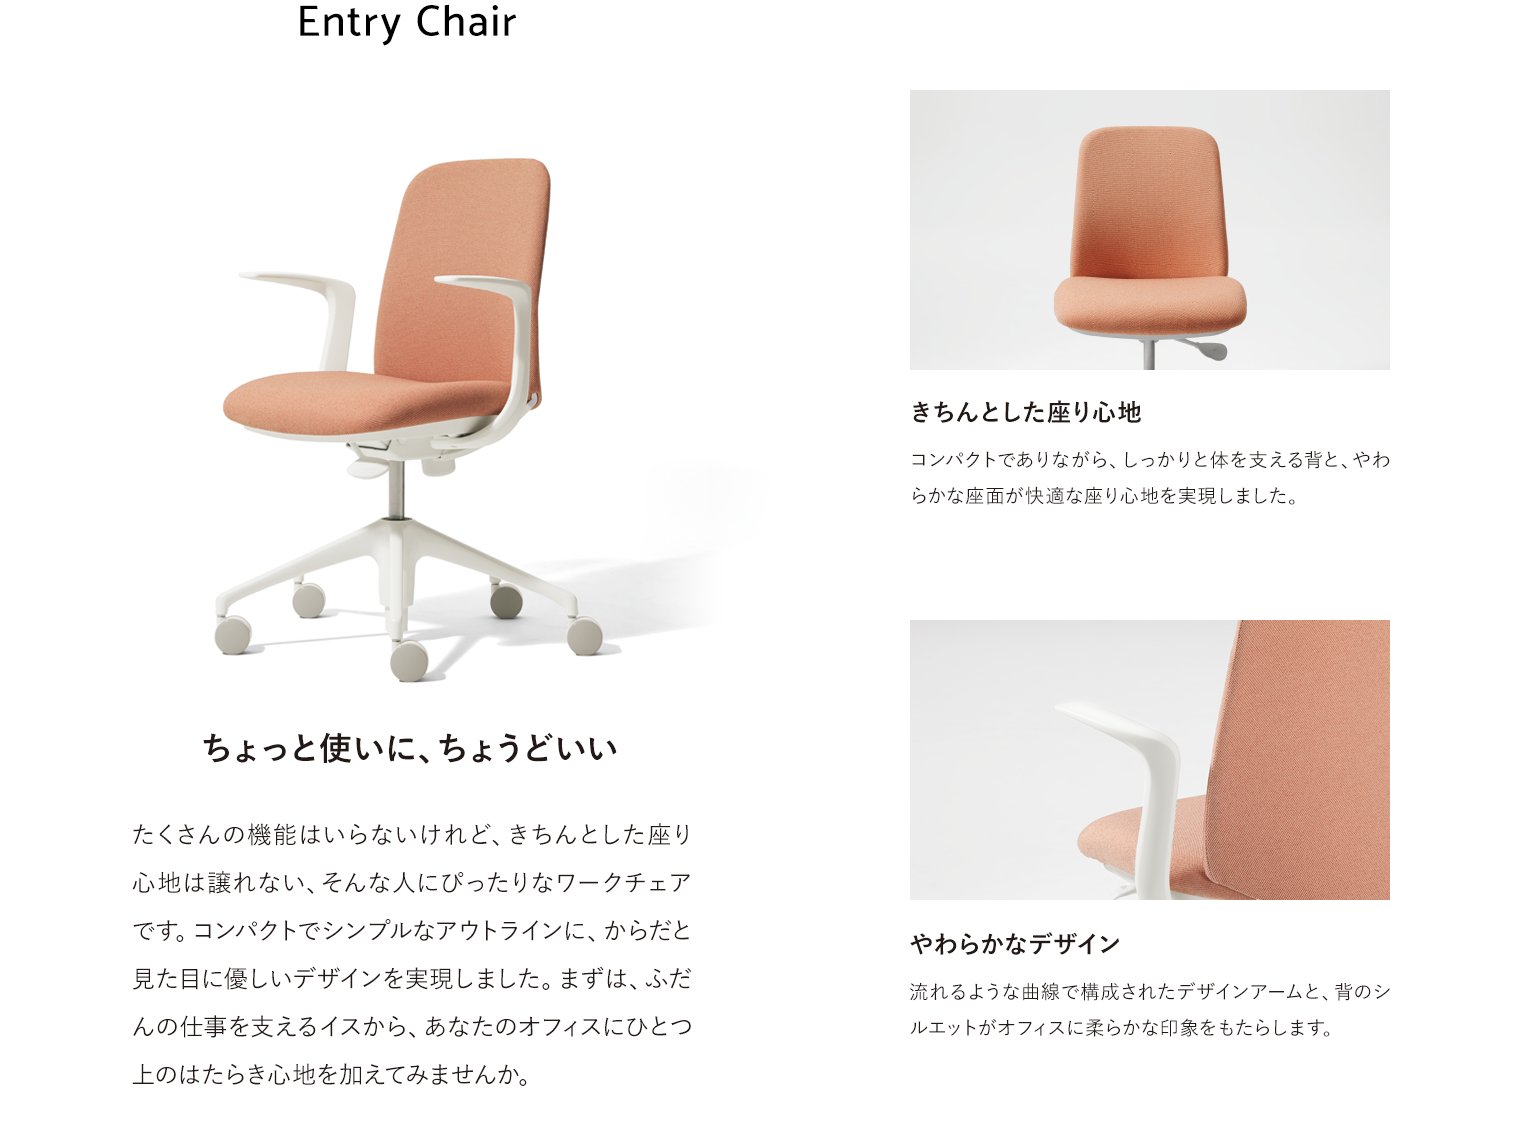 Entry Chair